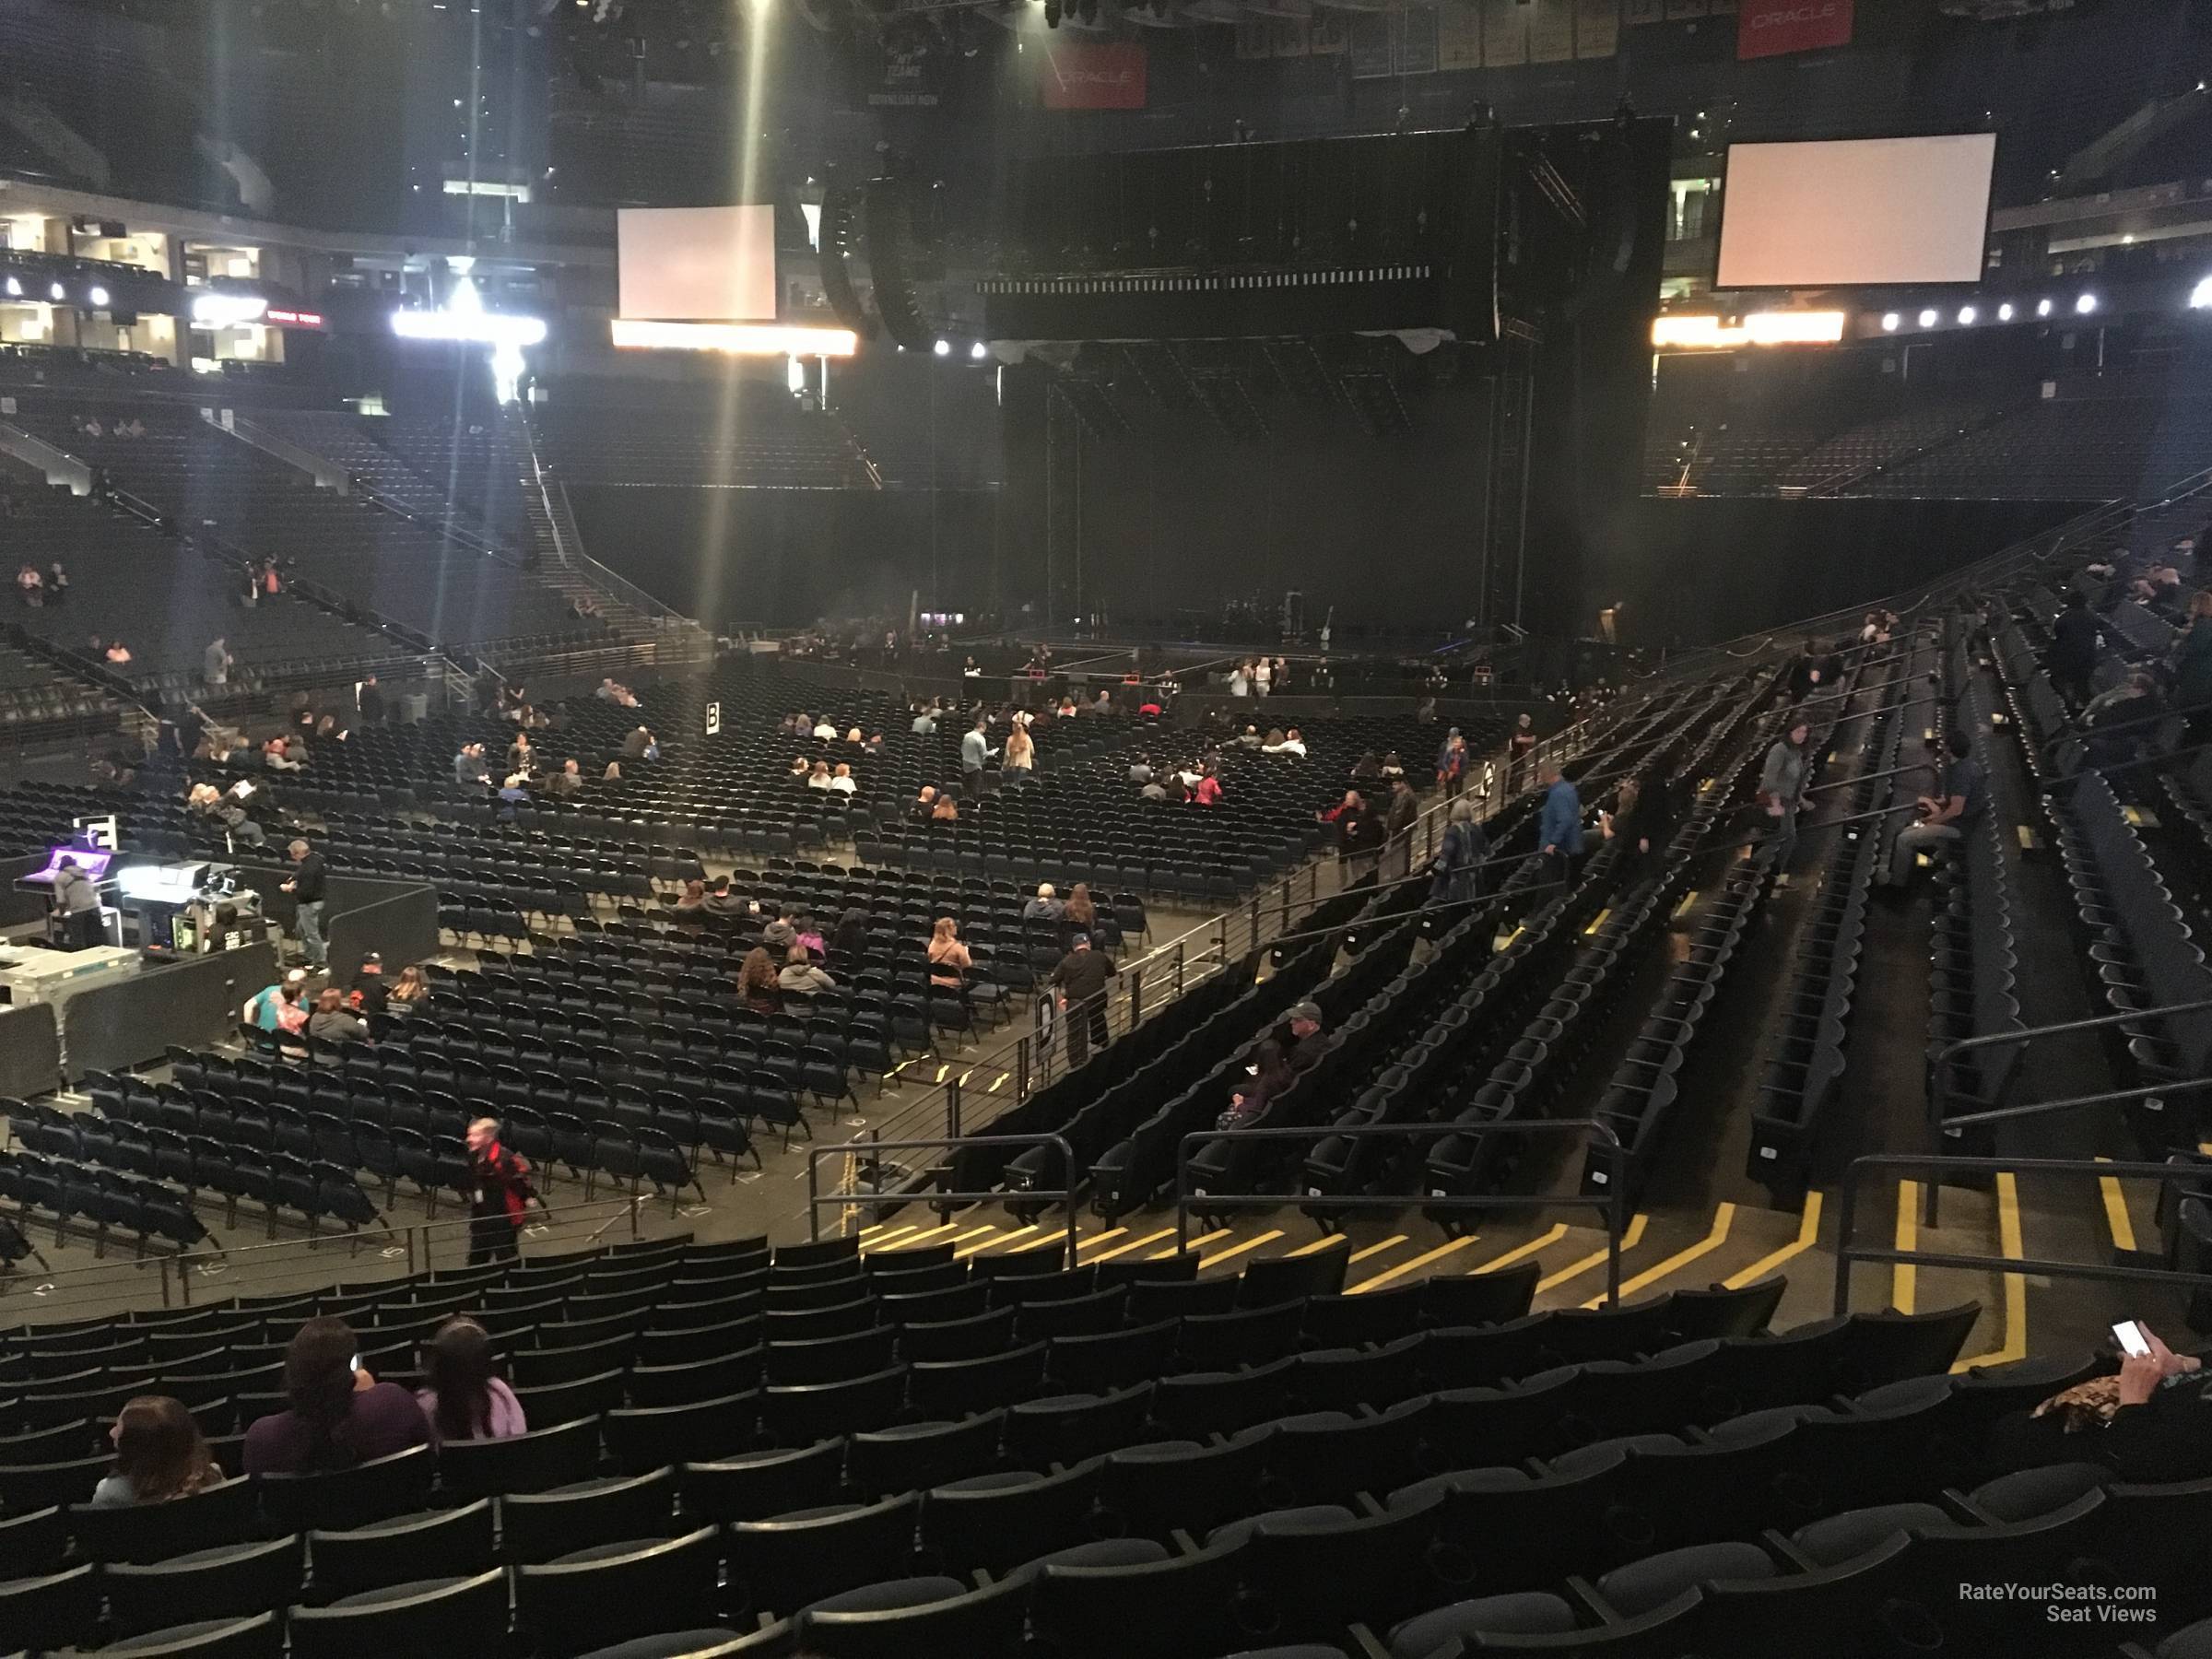 section 105, row 15 seat view  - oakland arena